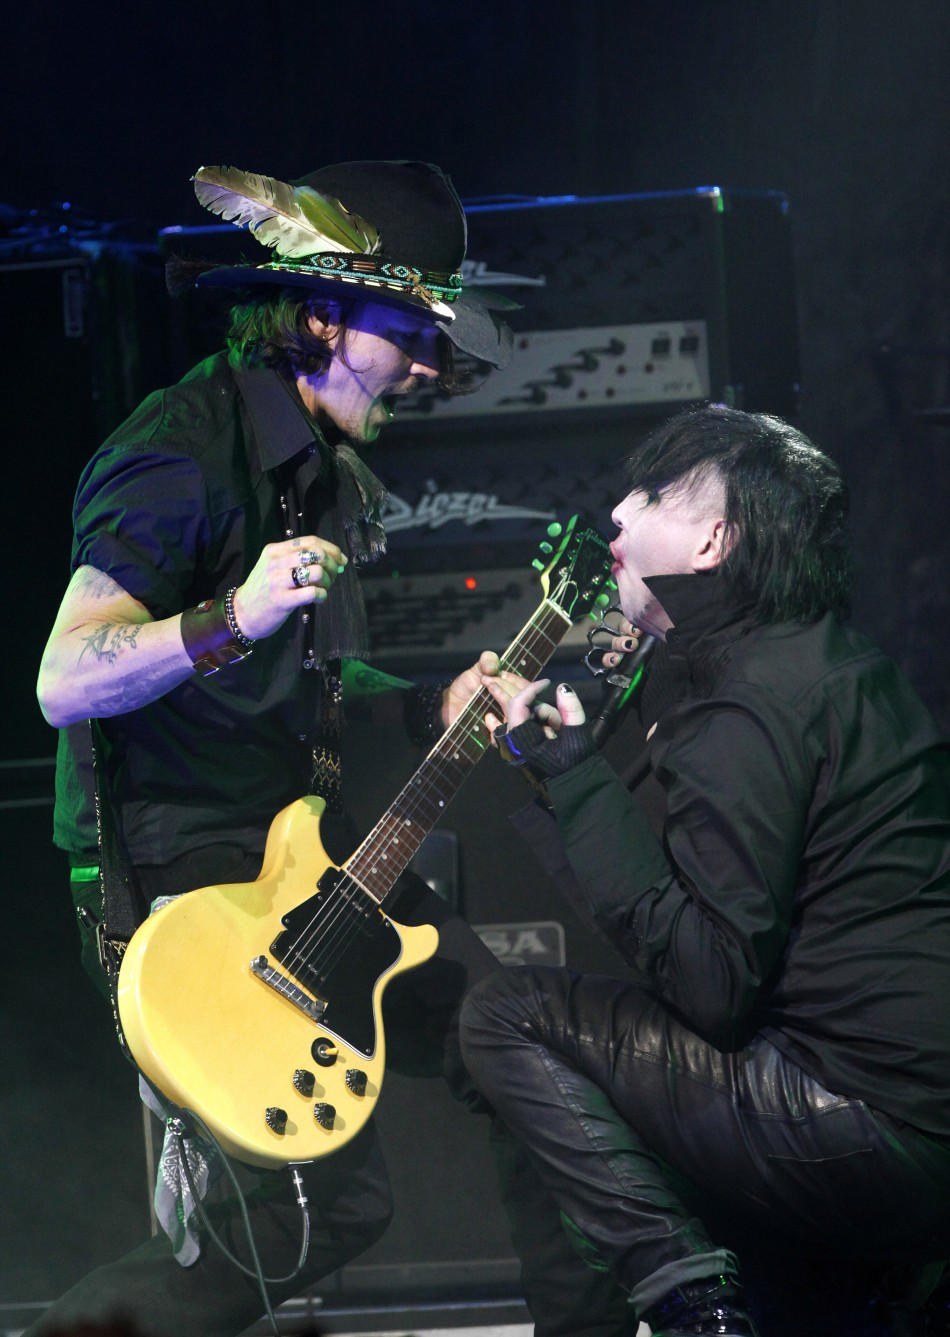 Actor Depp performs with musician Manson at the 4th annual Golden Gods awards at Nokia theatre in Los Angeles